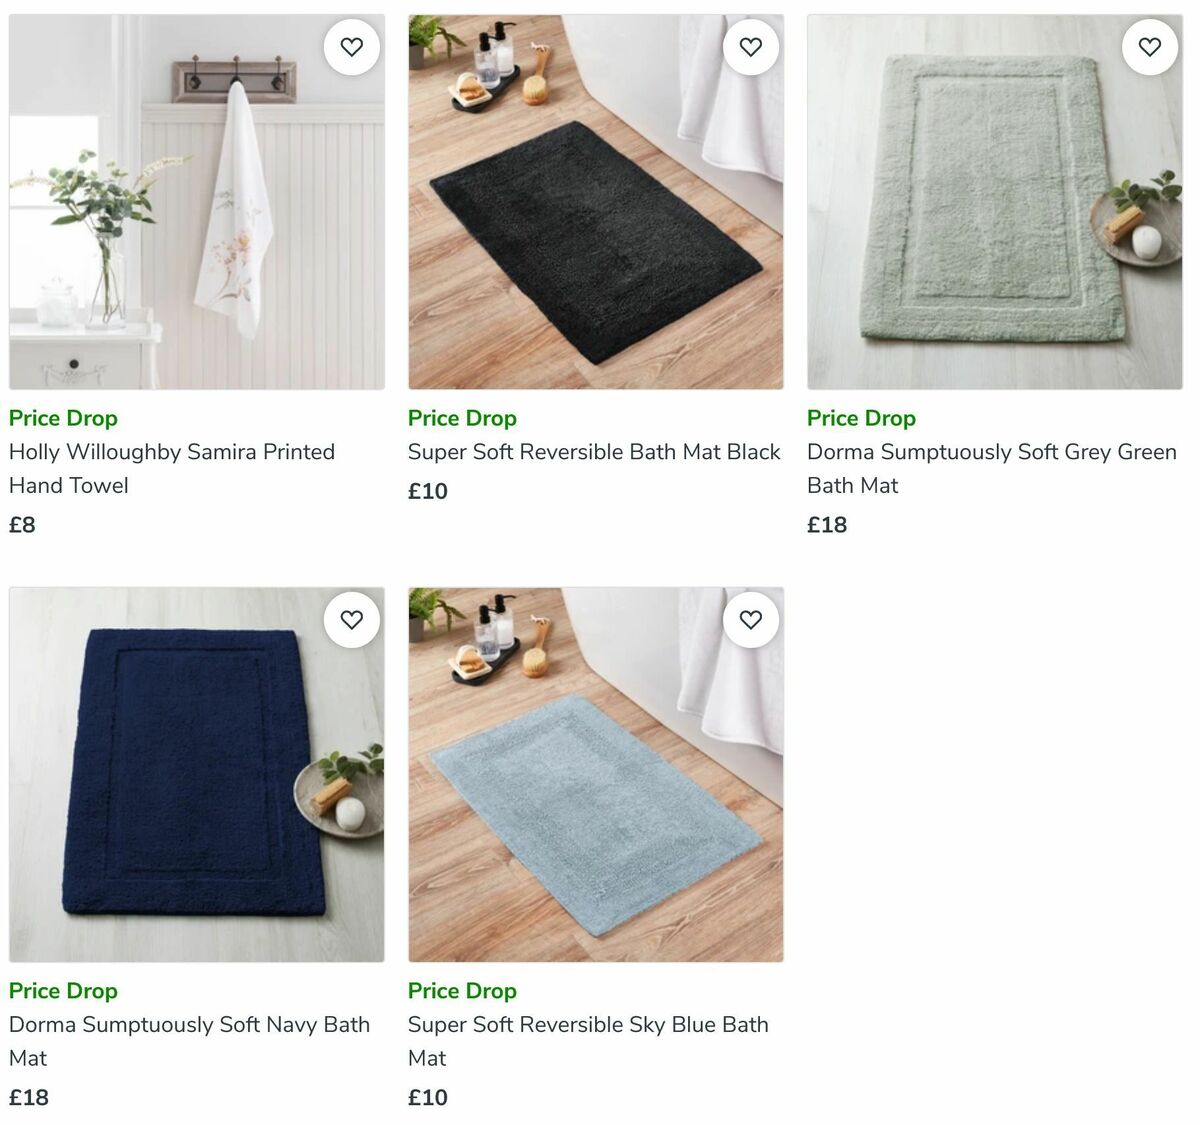 Dunelm Price Drop Offers from 14 July